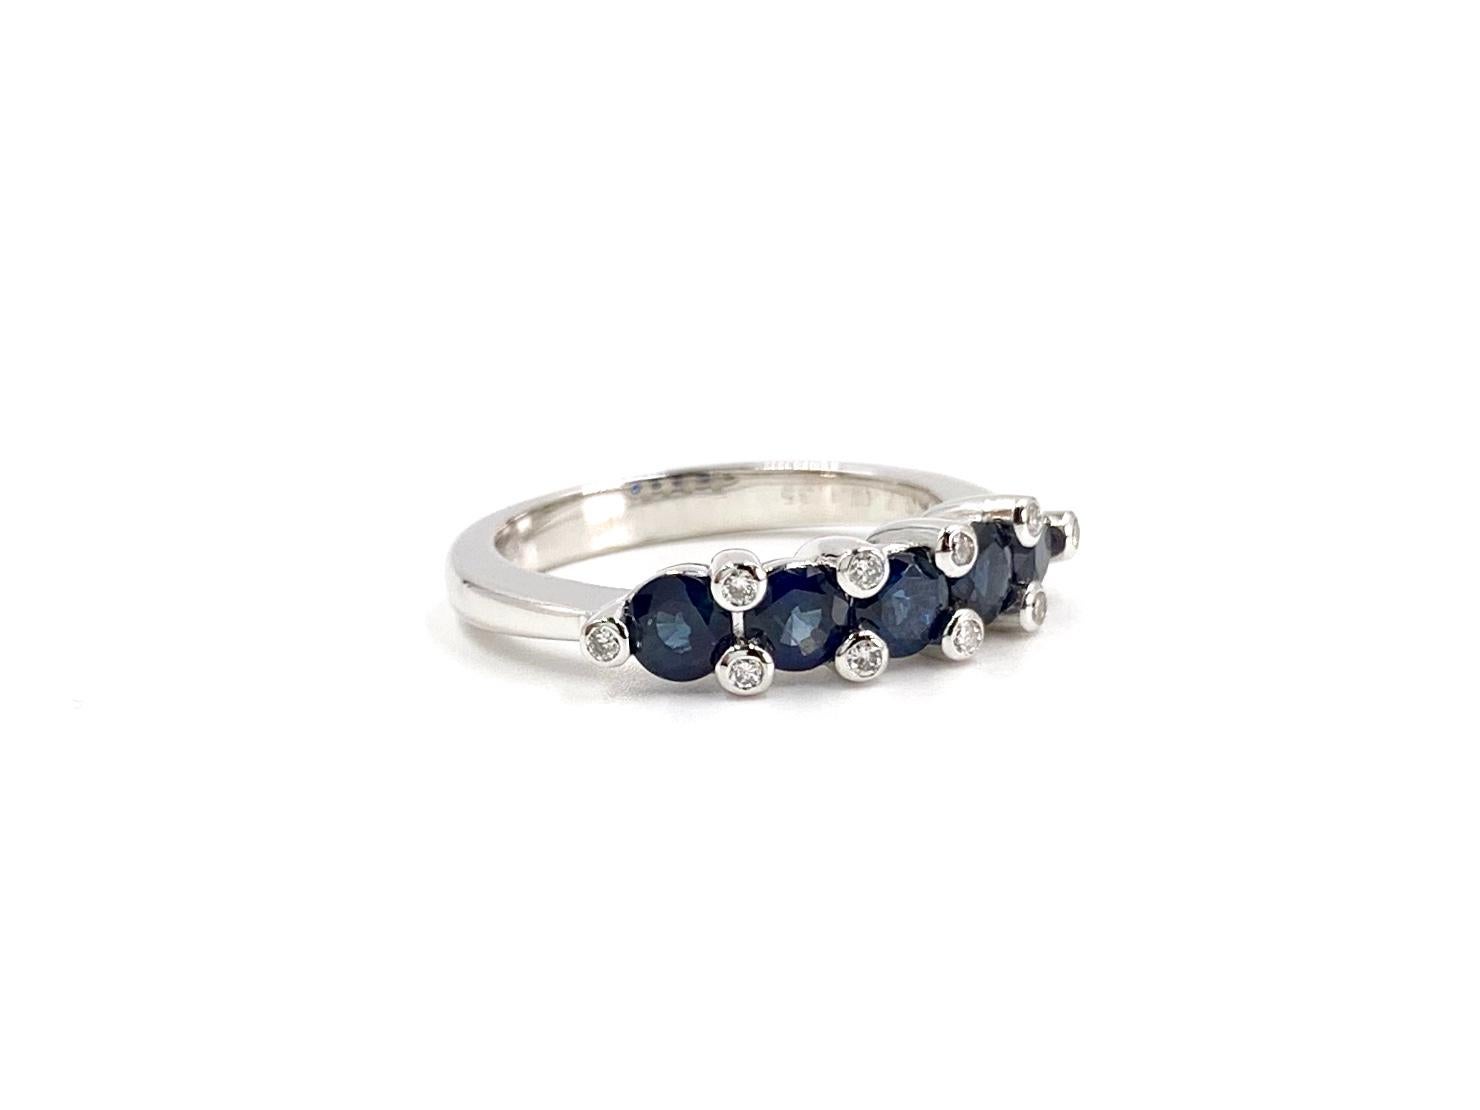 18 Karat white gold blue sapphire and diamond band ring by Favero. Five round deep blue sapphires have a total weight of 1.35 carats. Round diamonds are expertly bezel set within the prongs at .12 carats total weight. Width of face of band measures